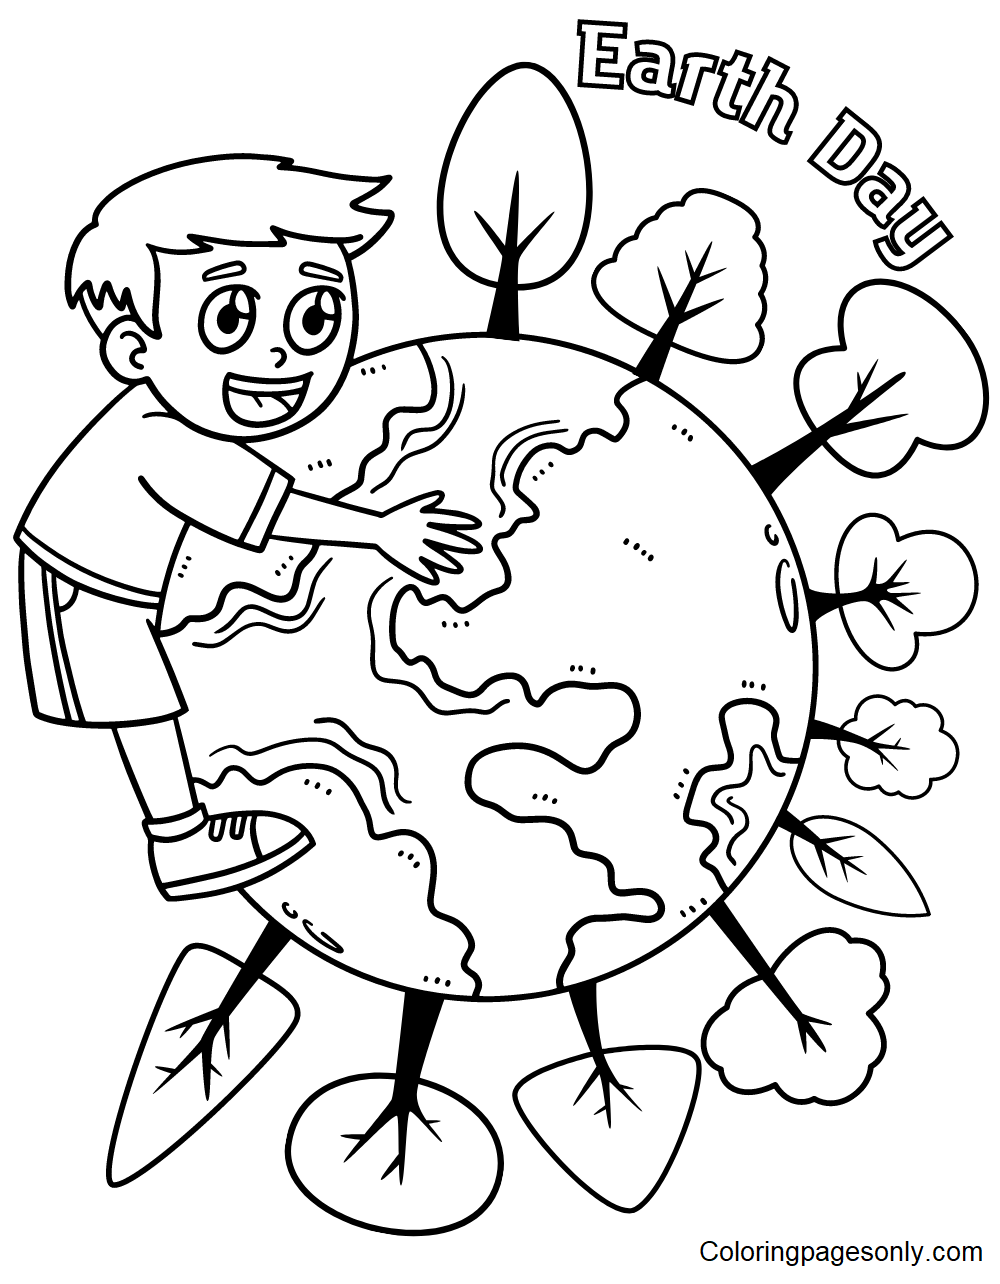 Earth Day Boy Embracing Earth Coloring Pages